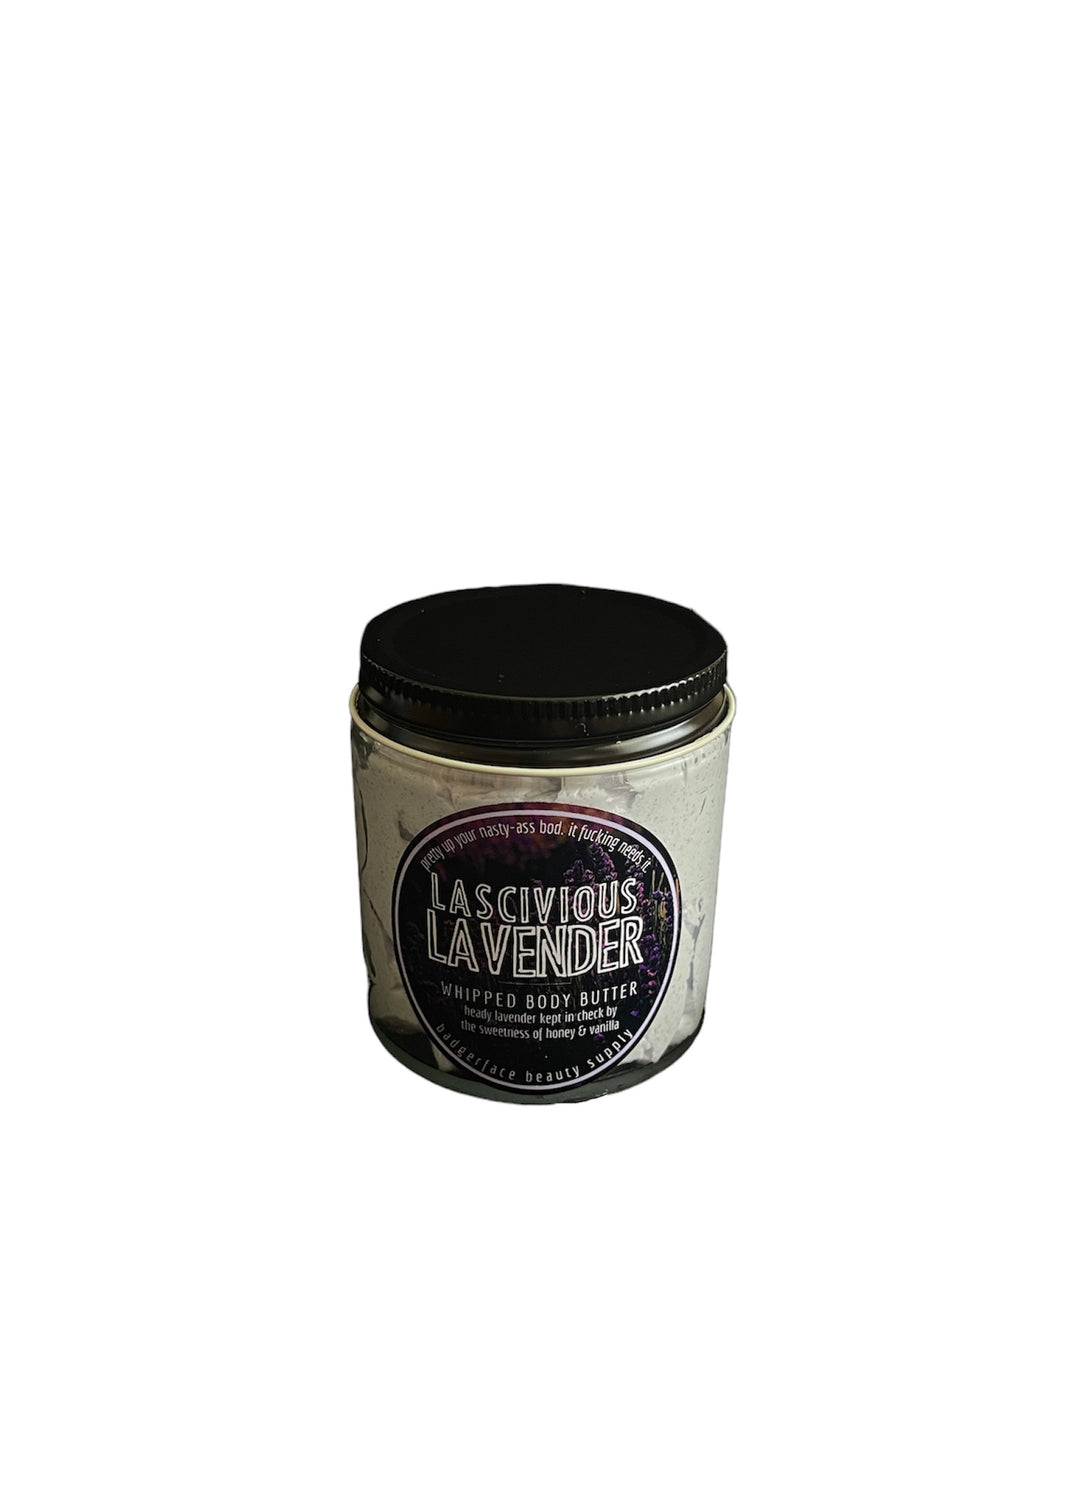 LASCIVIOUS LAVENDER WHIPPED BODY BUTTER